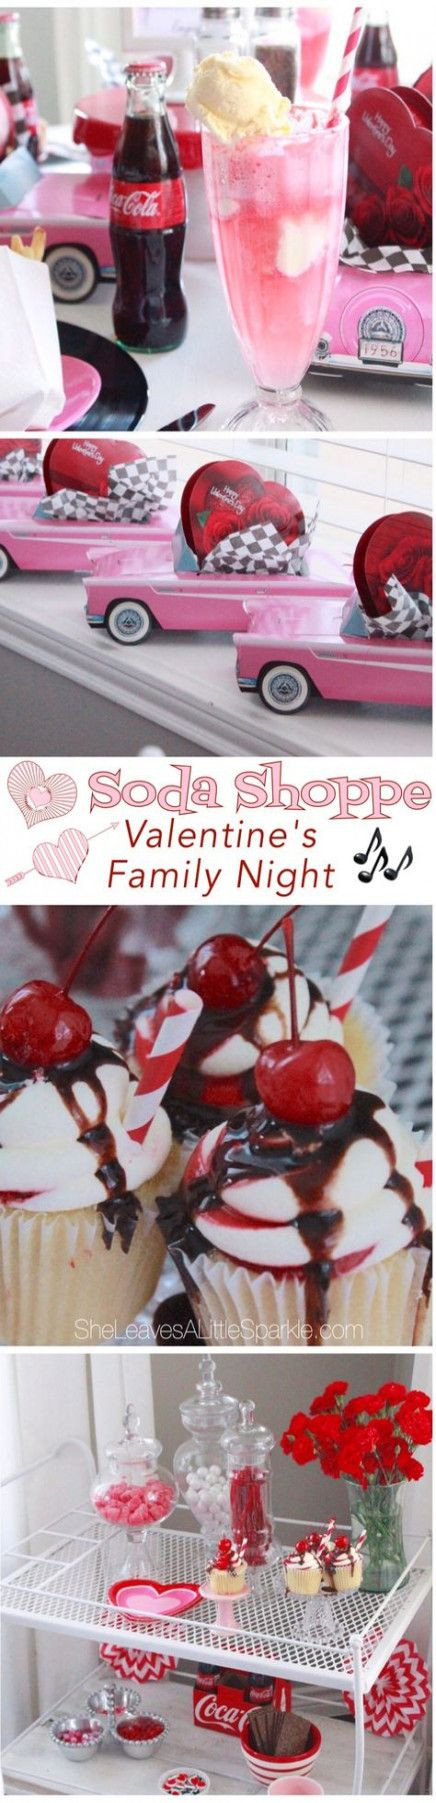 Valentine Dinner For Family
 Desserts Easy For Kids Families Valentines Day 38 Ideas